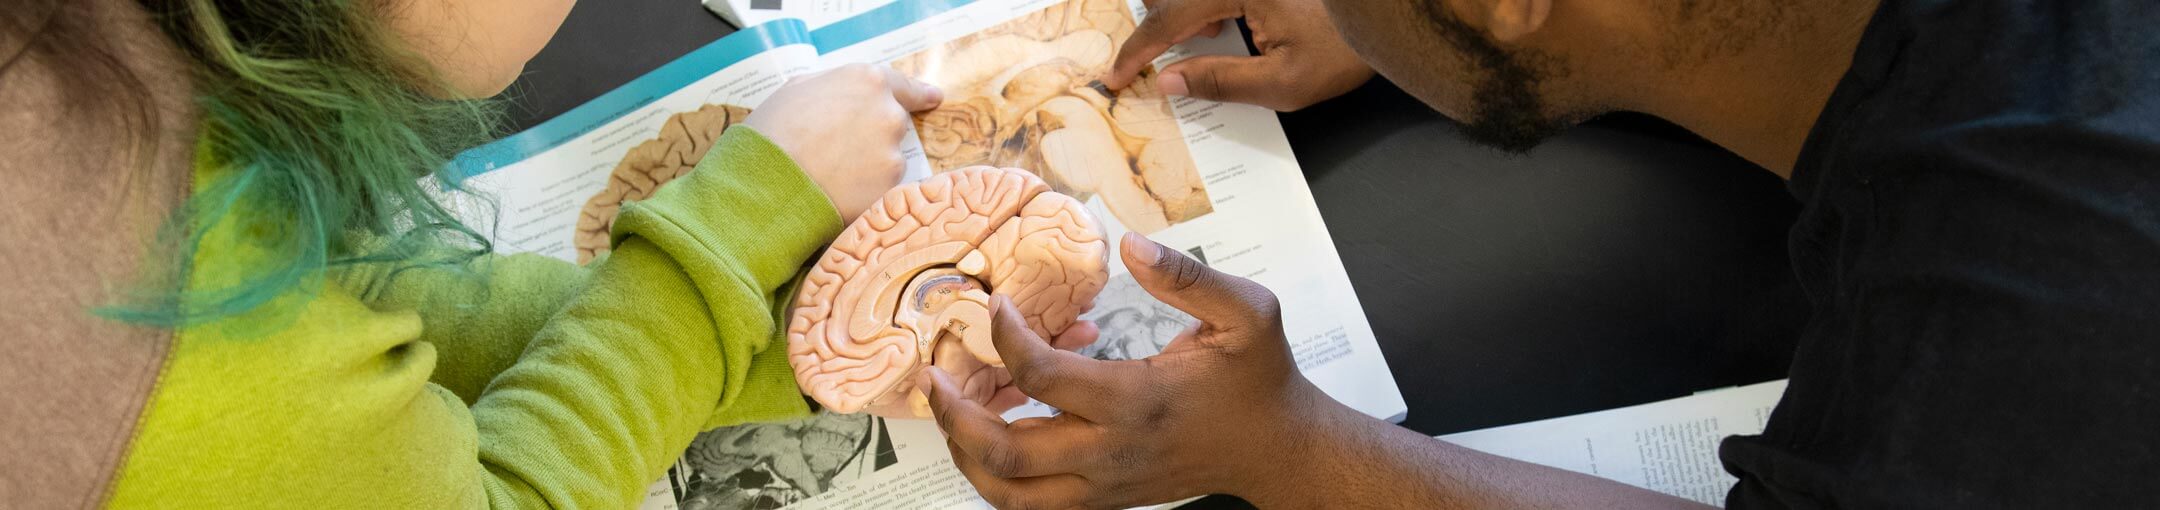 Close up of two students looking at a textbook and holding a model of a brain.